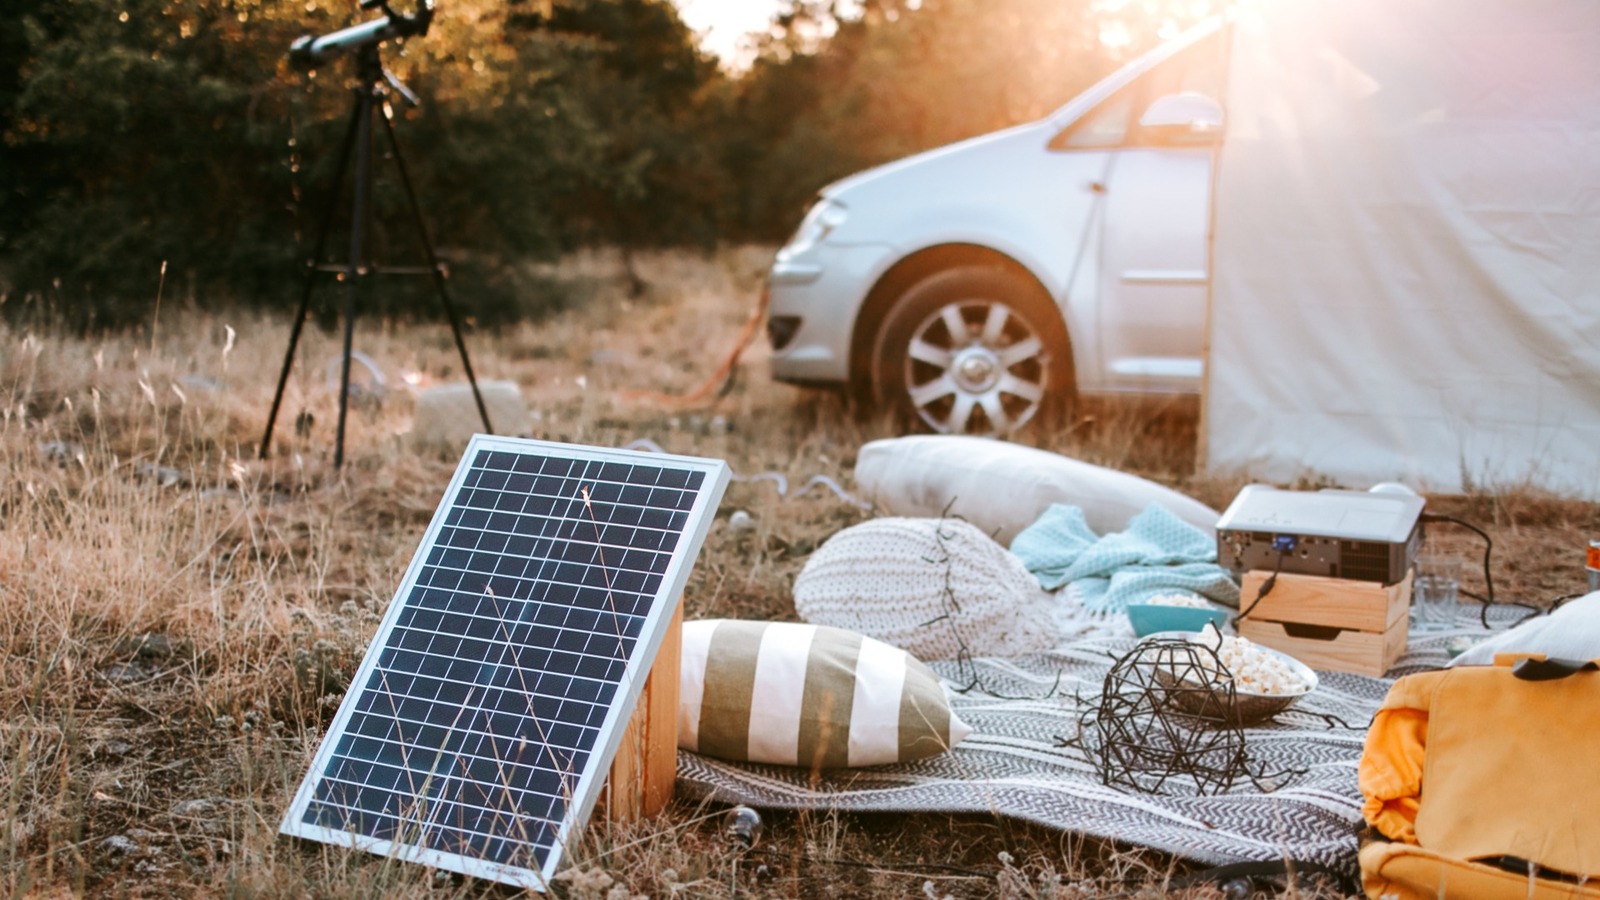 5 Solar Camping Gadgets To Bring On Your Next Camping Trip